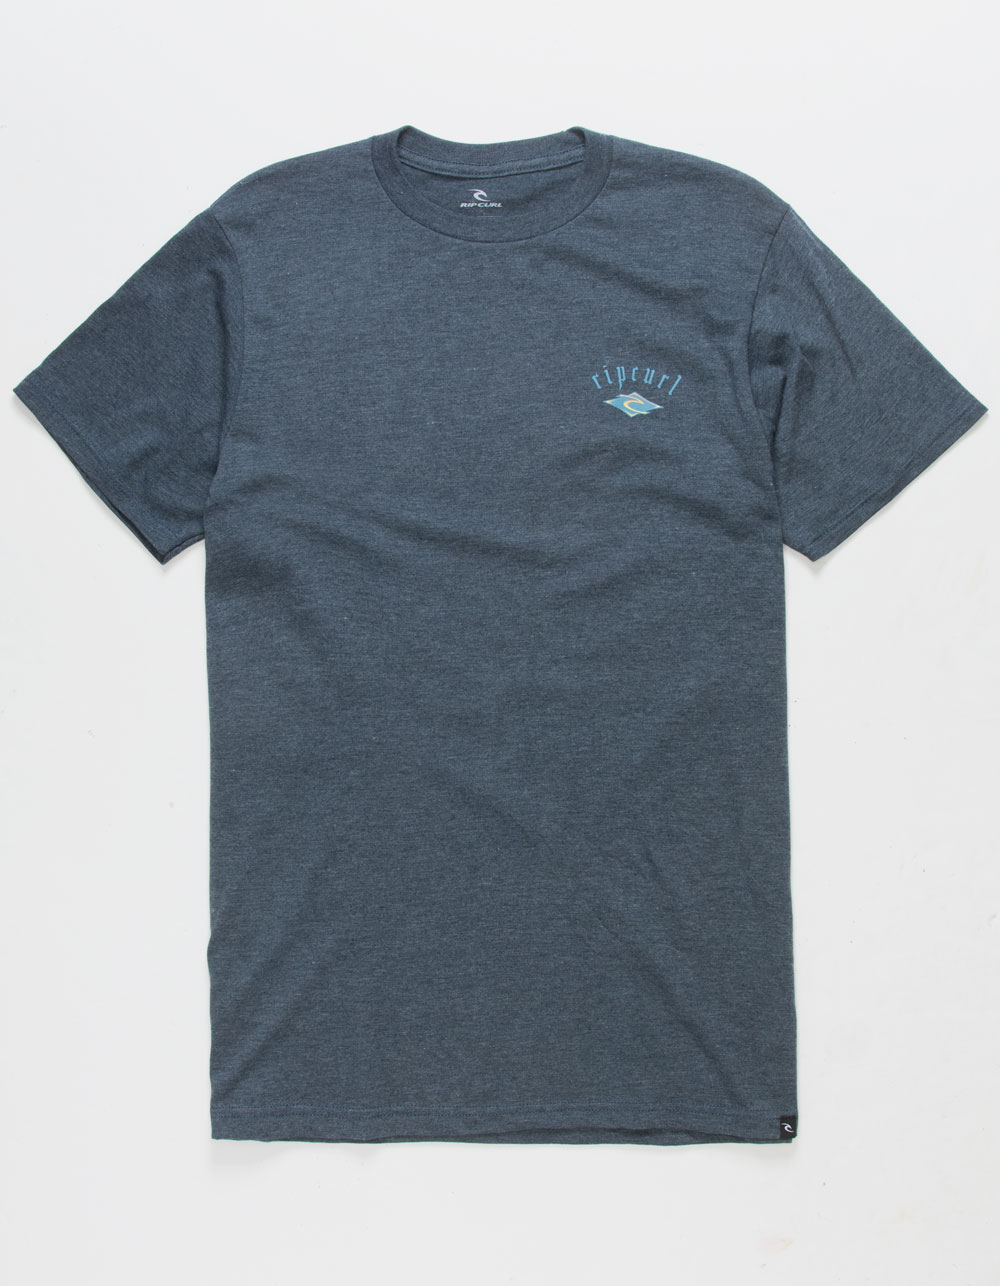 RIP CURL Alignment Mens Tee - HEATHER NAVY | Tillys